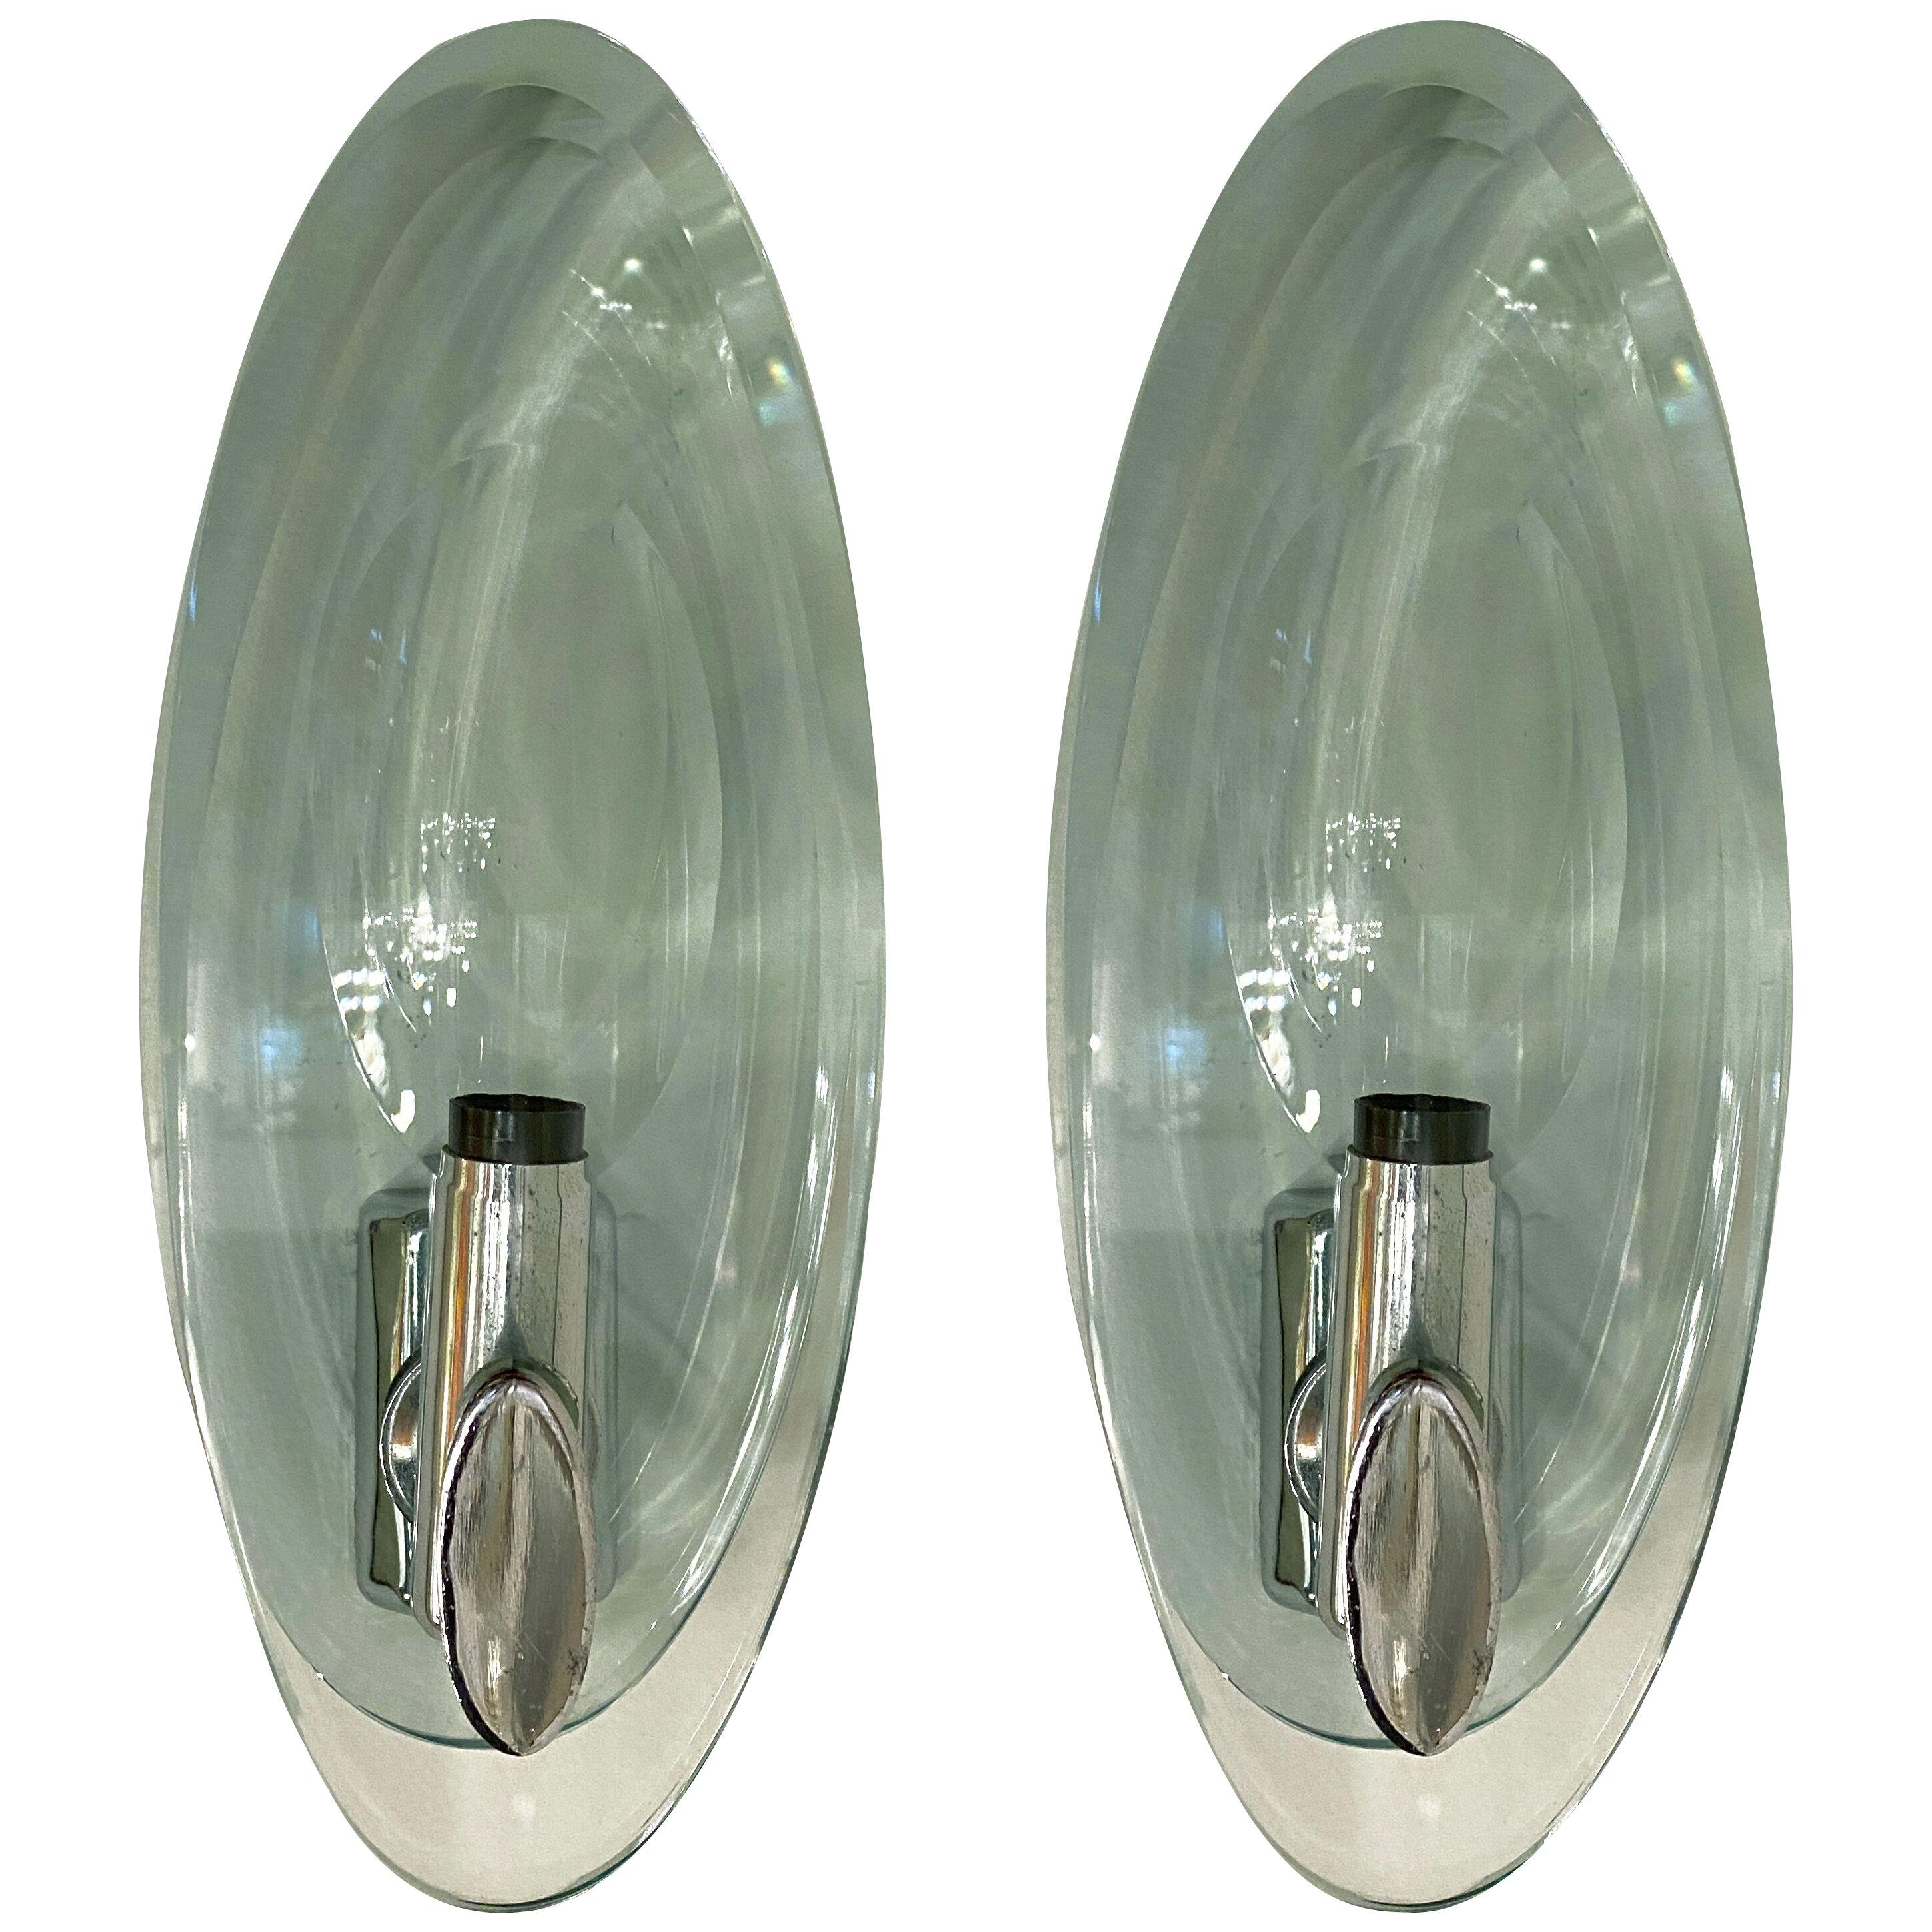 Pair of Italian Modern Glass and Polished Nickel Sconces,Max Ingrand for Fontana